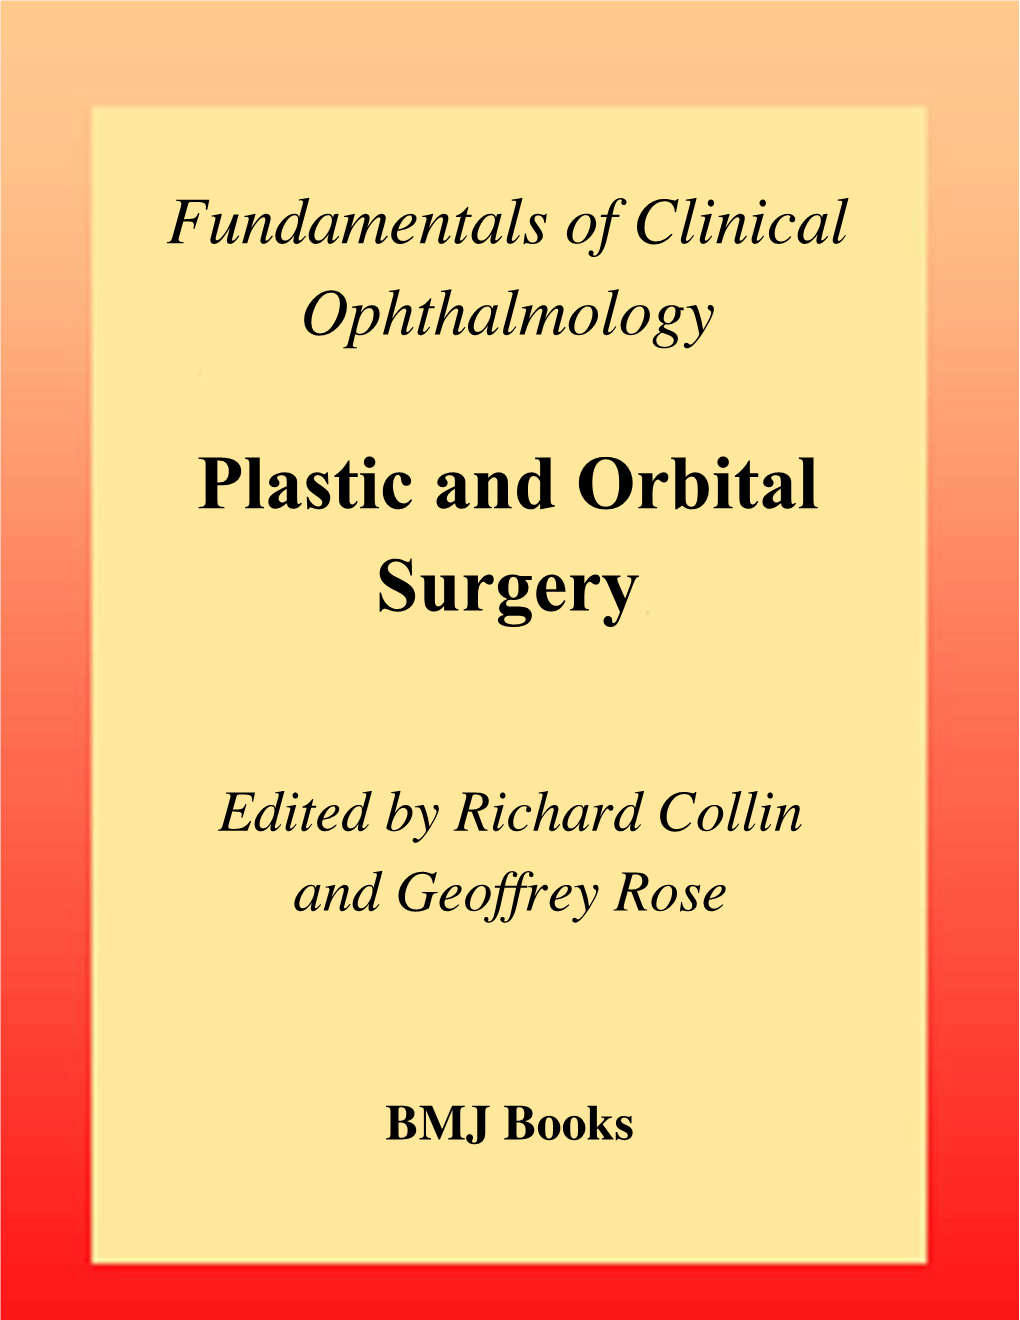 Fundamentals of Clinical Ophthalmology Plastic and Orbital Surgery Fundamentals of Clinical Ophthalmology Series